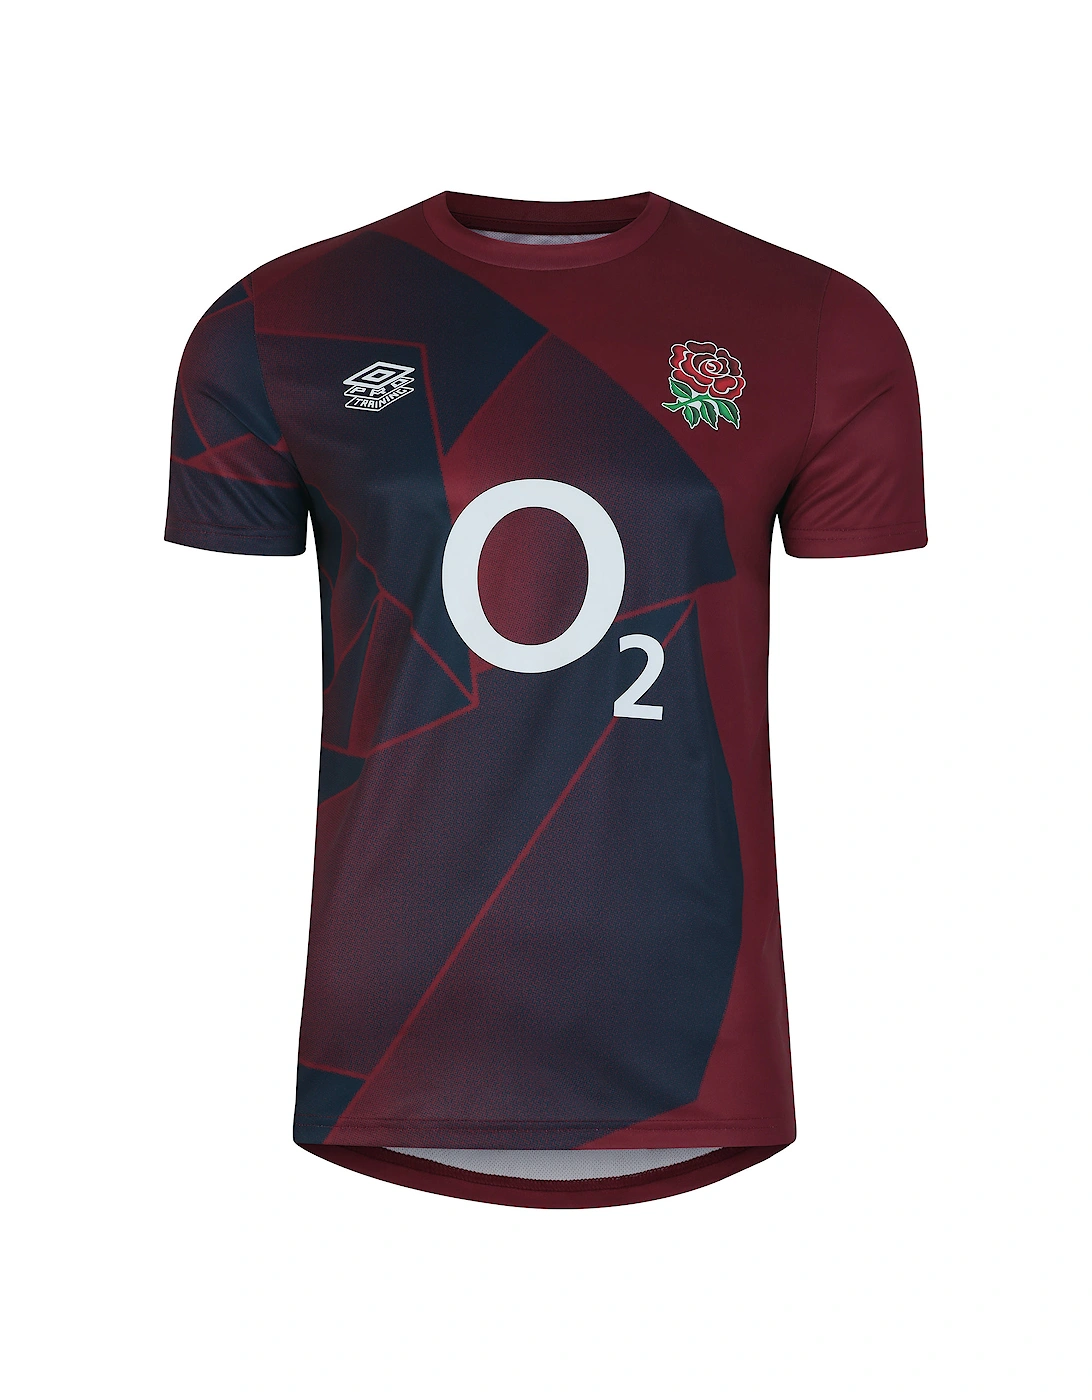 Mens 23/24 England Rugby Warm Up Jersey, 2 of 1